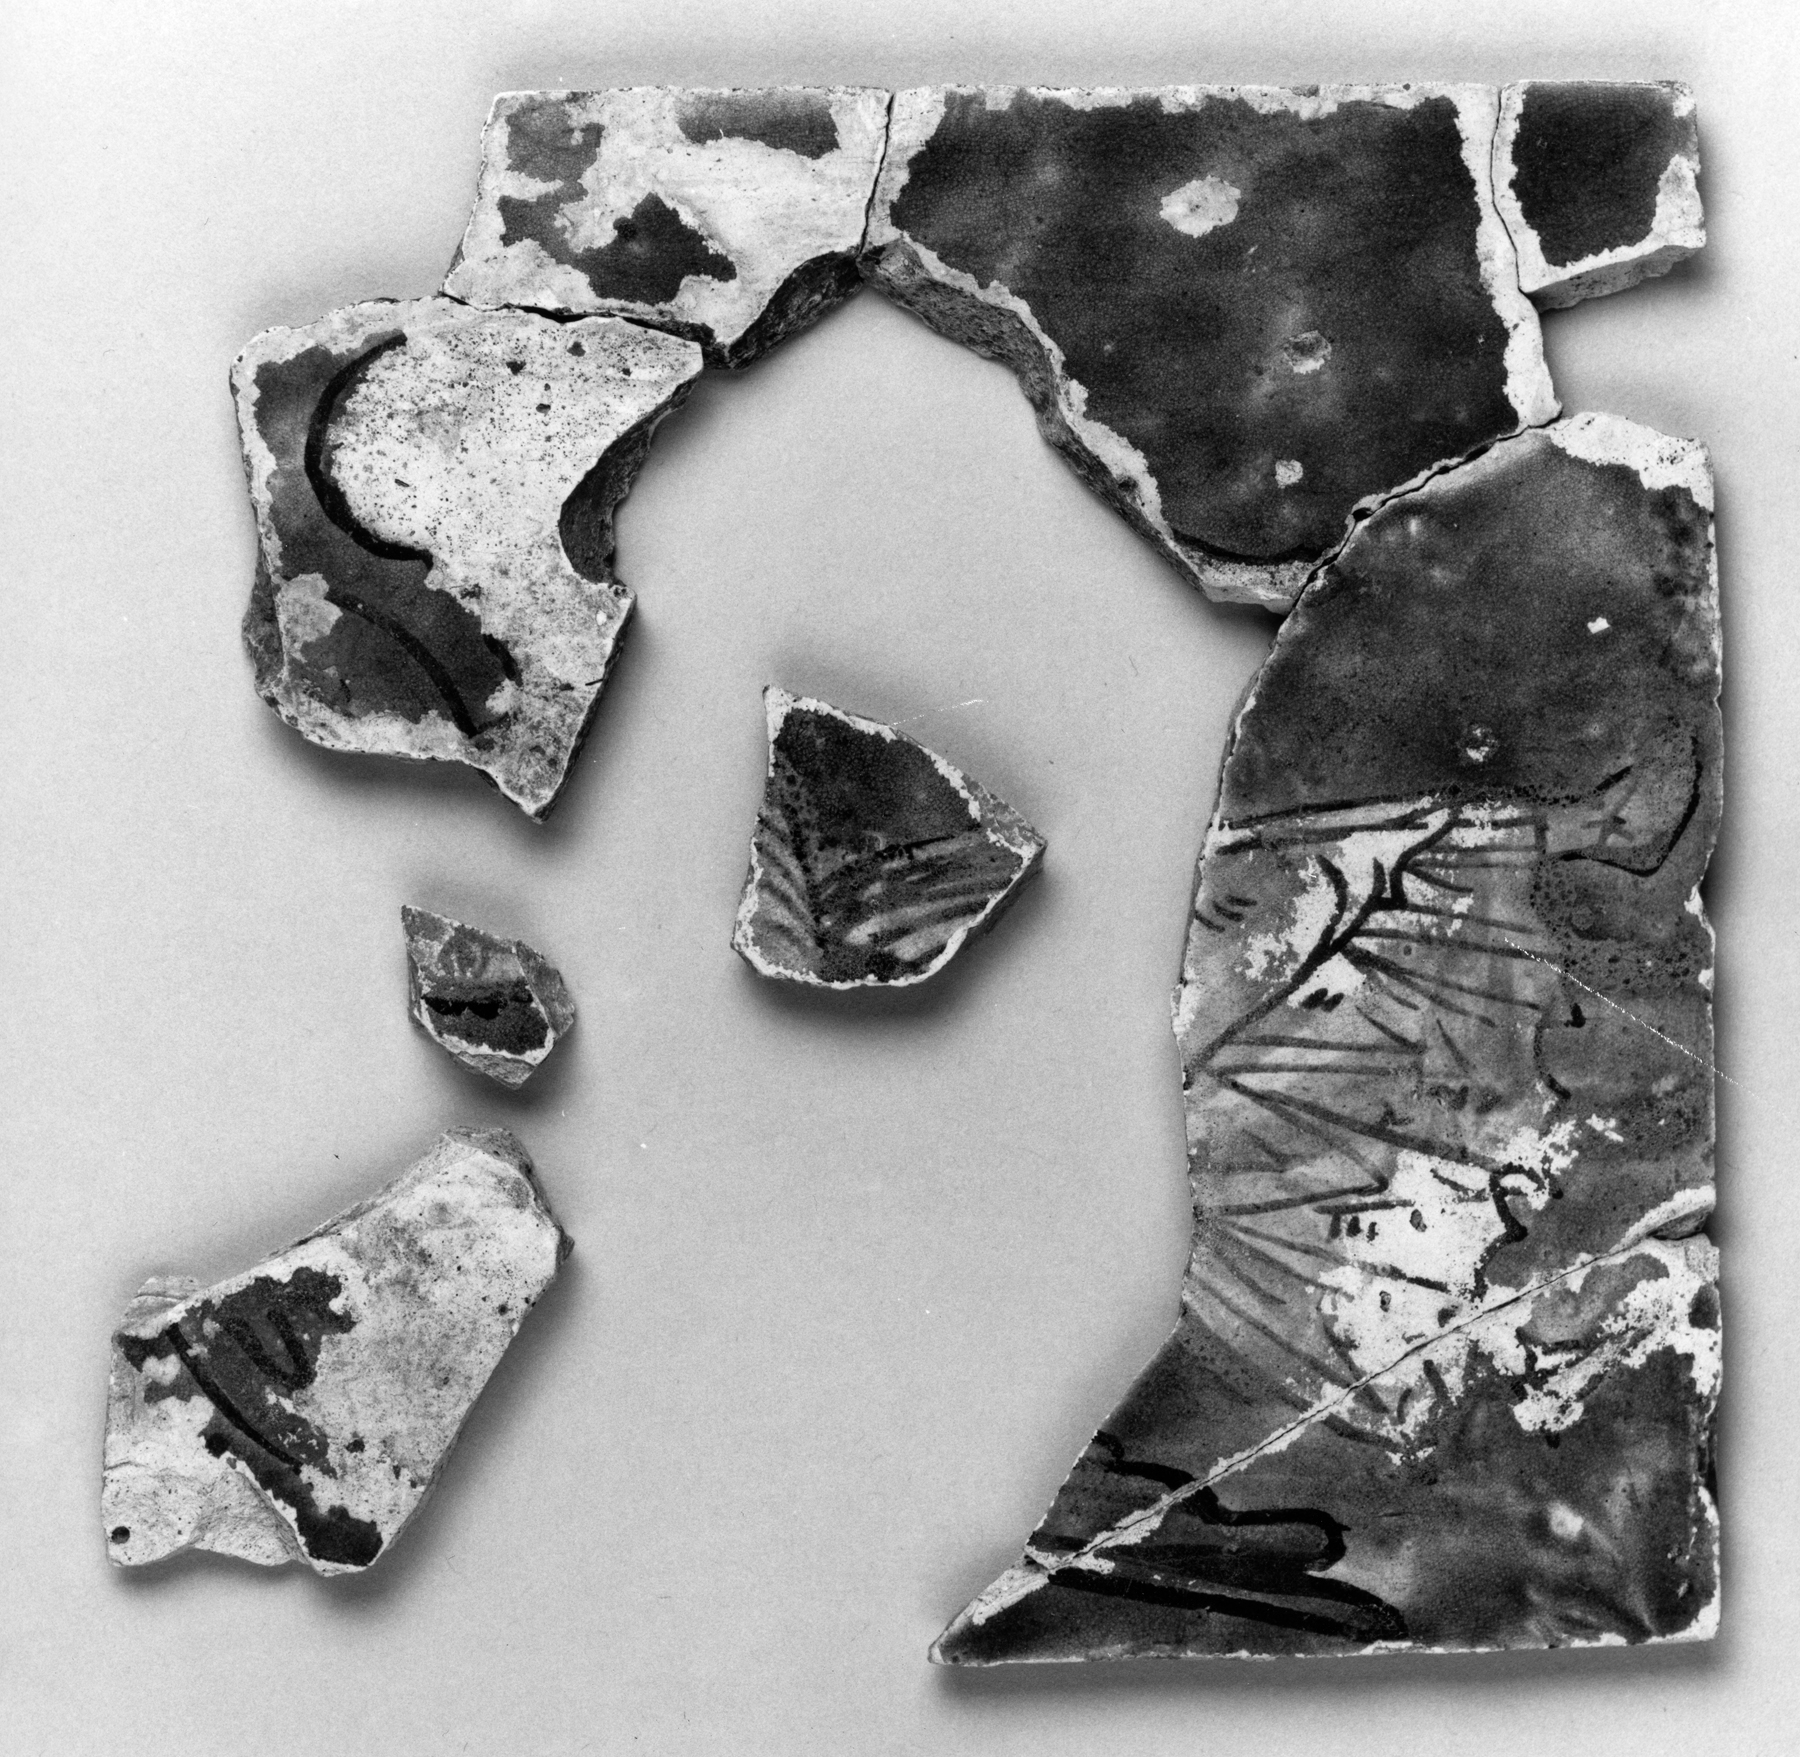 Image for Fragments of tiles depicting an angel